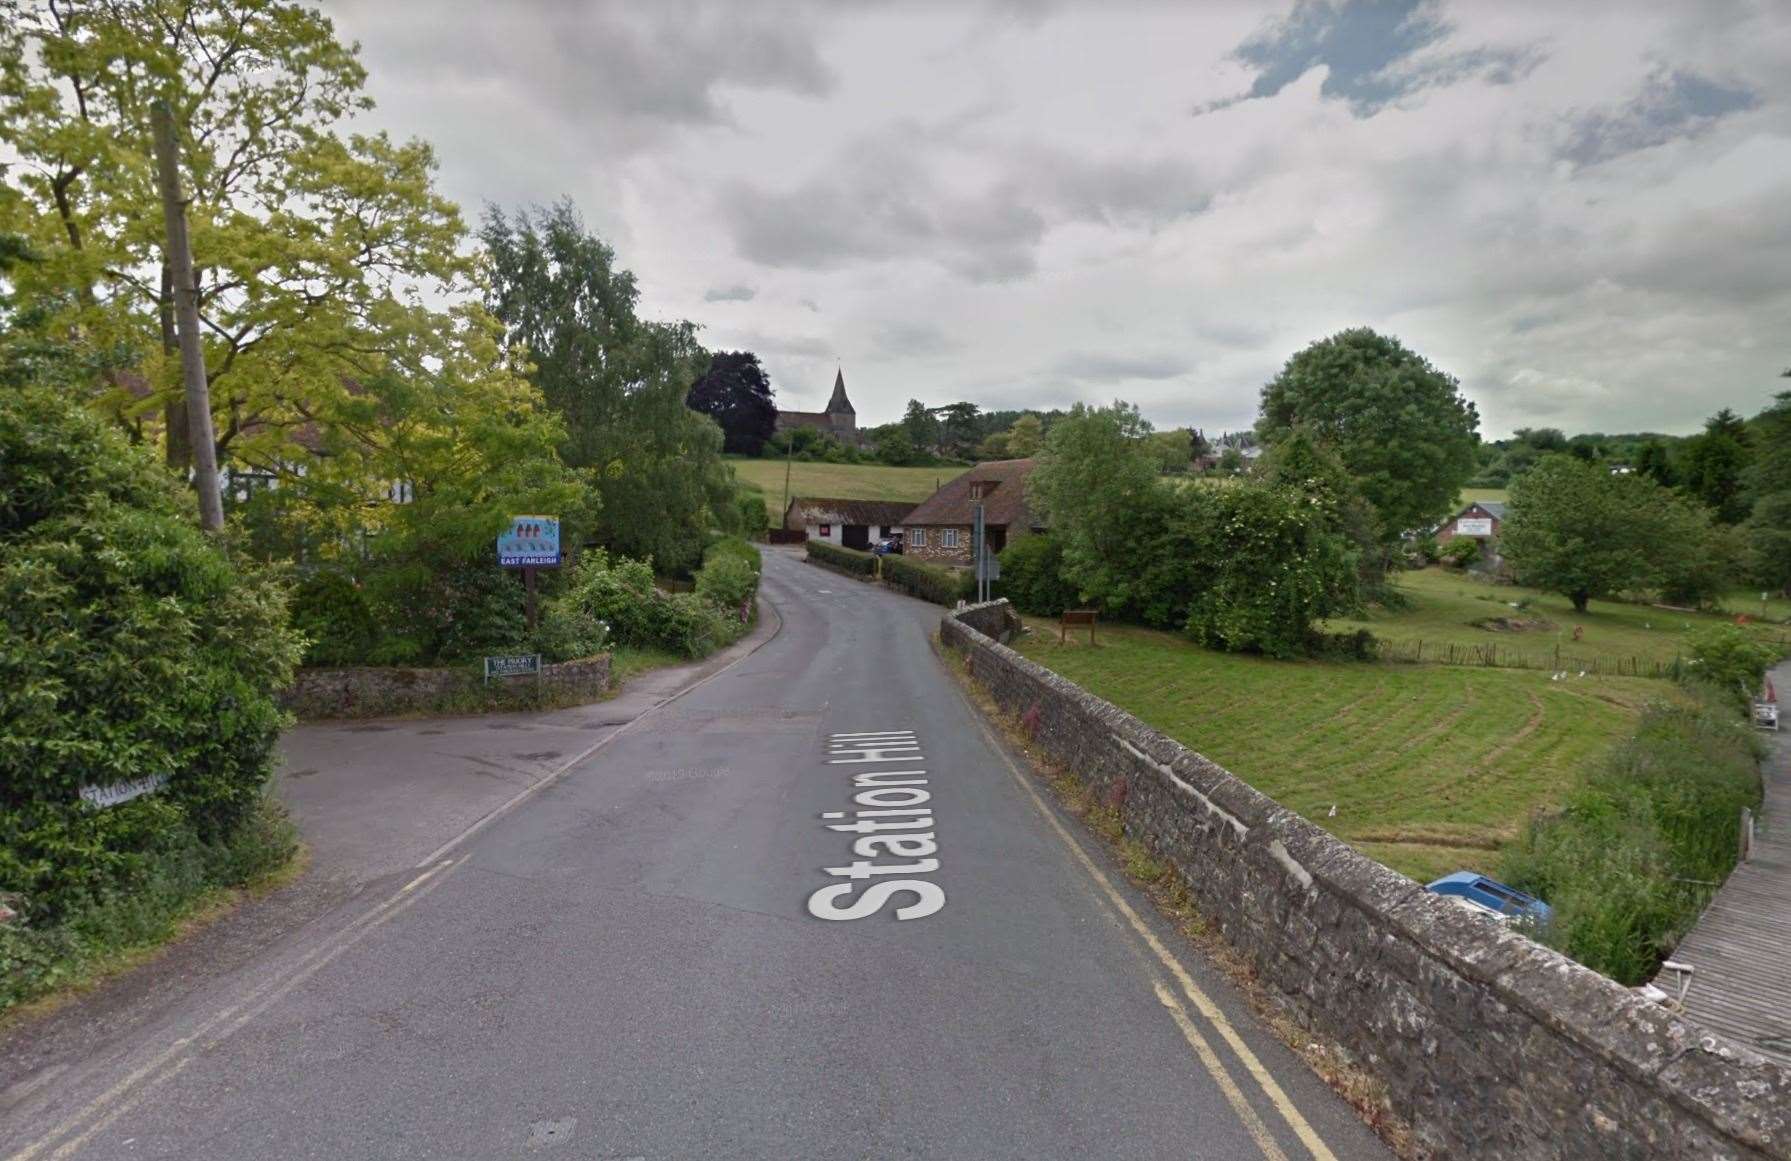 Station Hill, in East Farleigh, is currently closed due to roadworks. Picture: Google